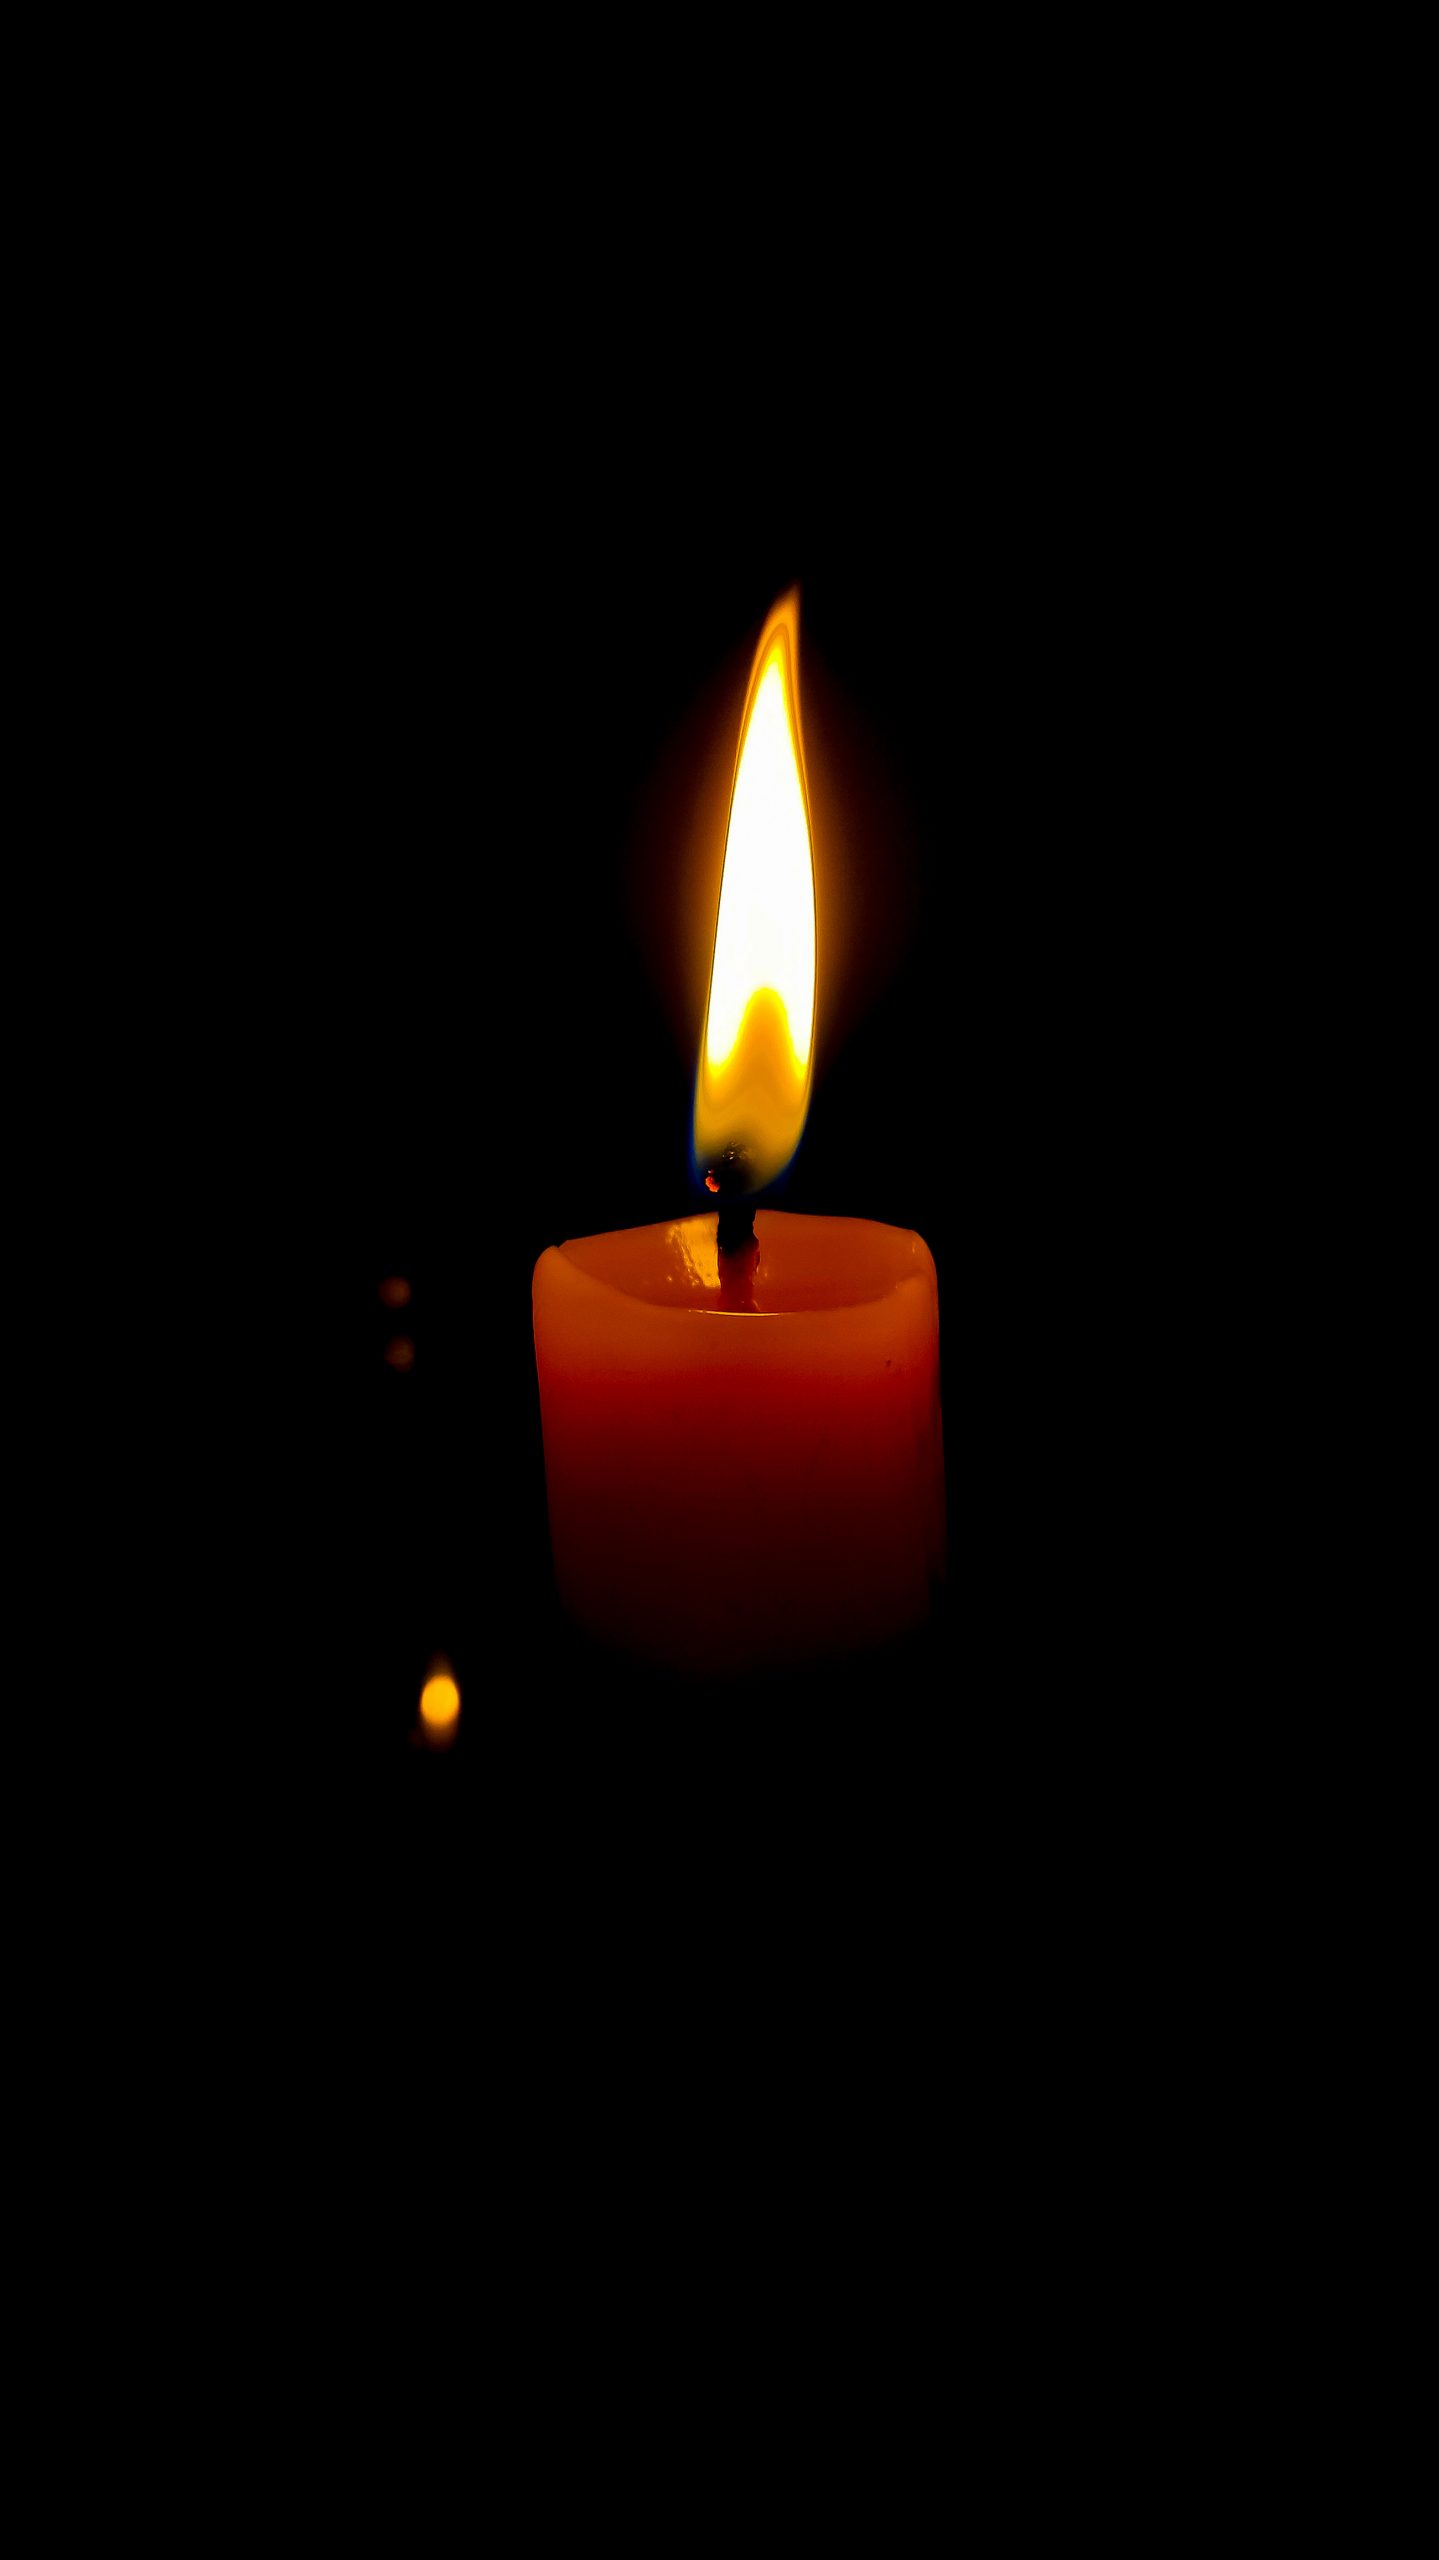 Candle flame on dark background